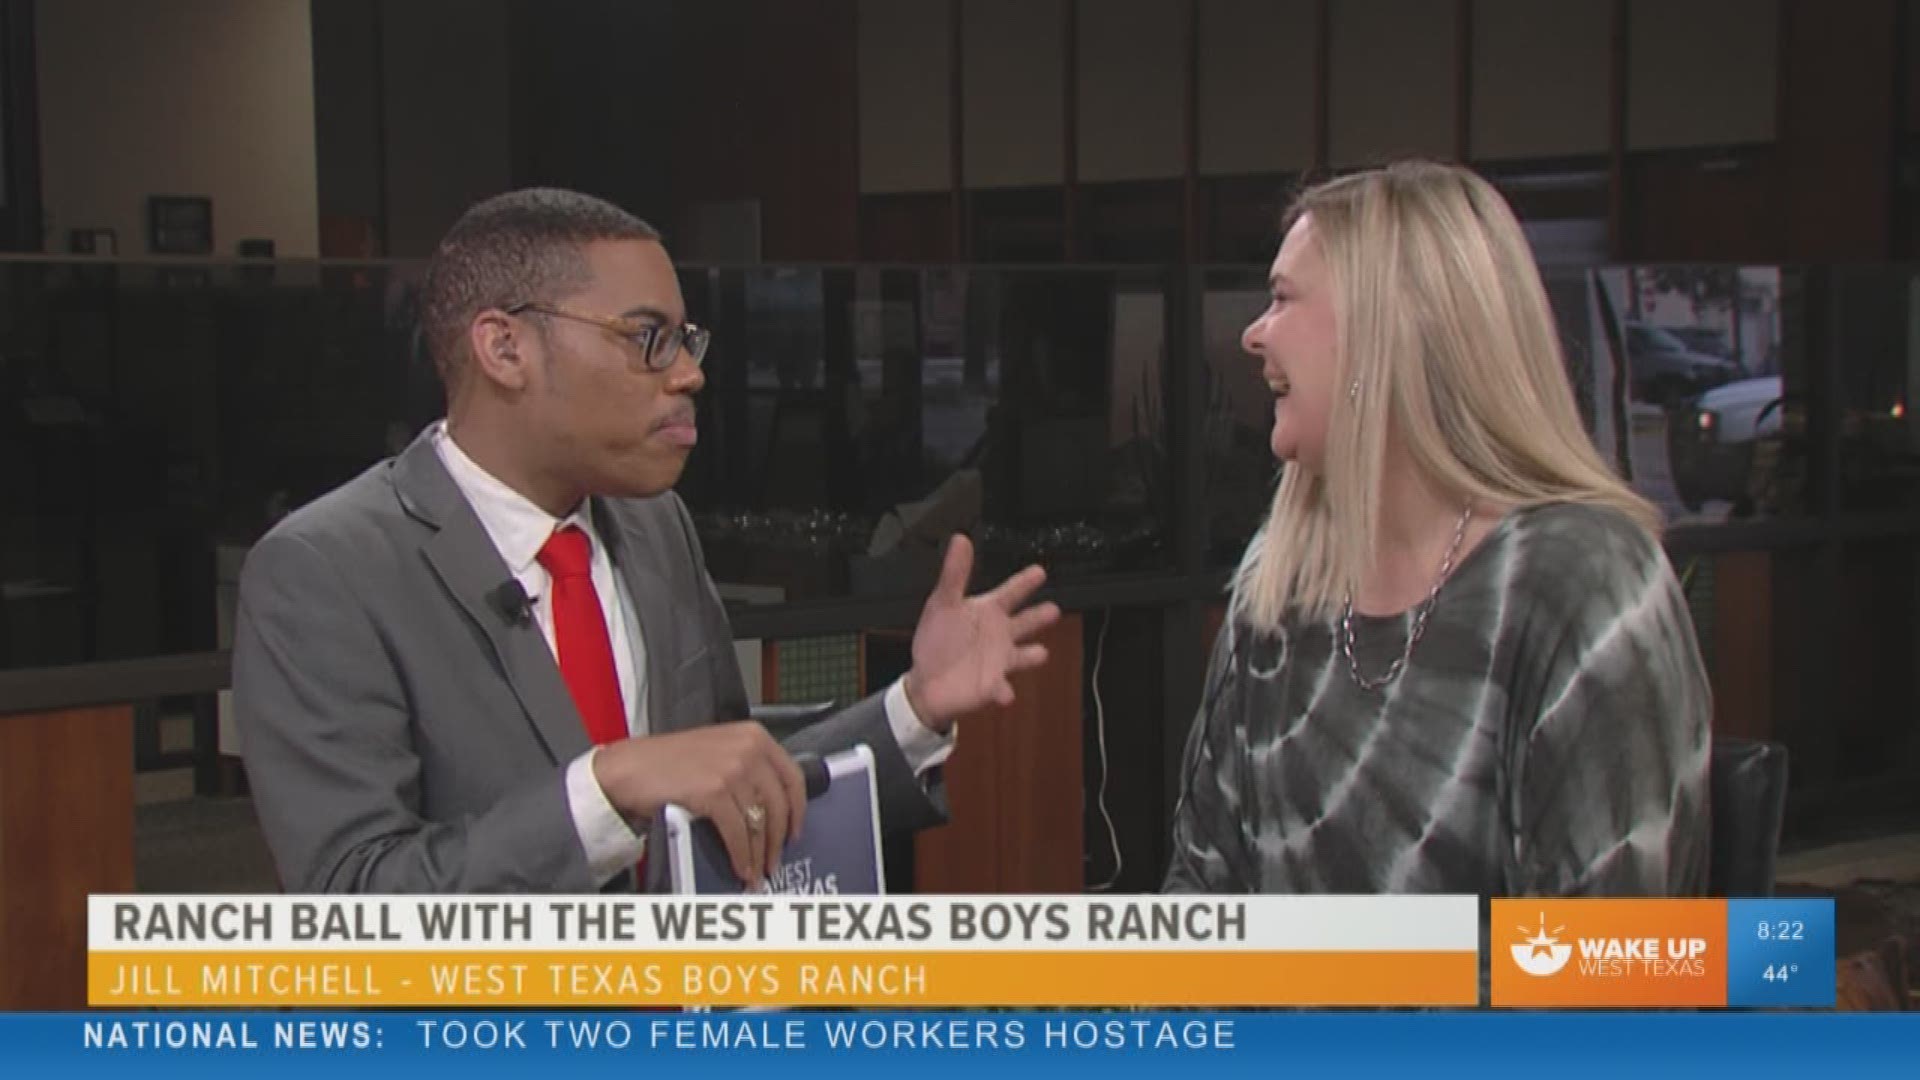 Our Malik Mingo spoke with West Texas Boys Ranch about their upcoming ranch ball.